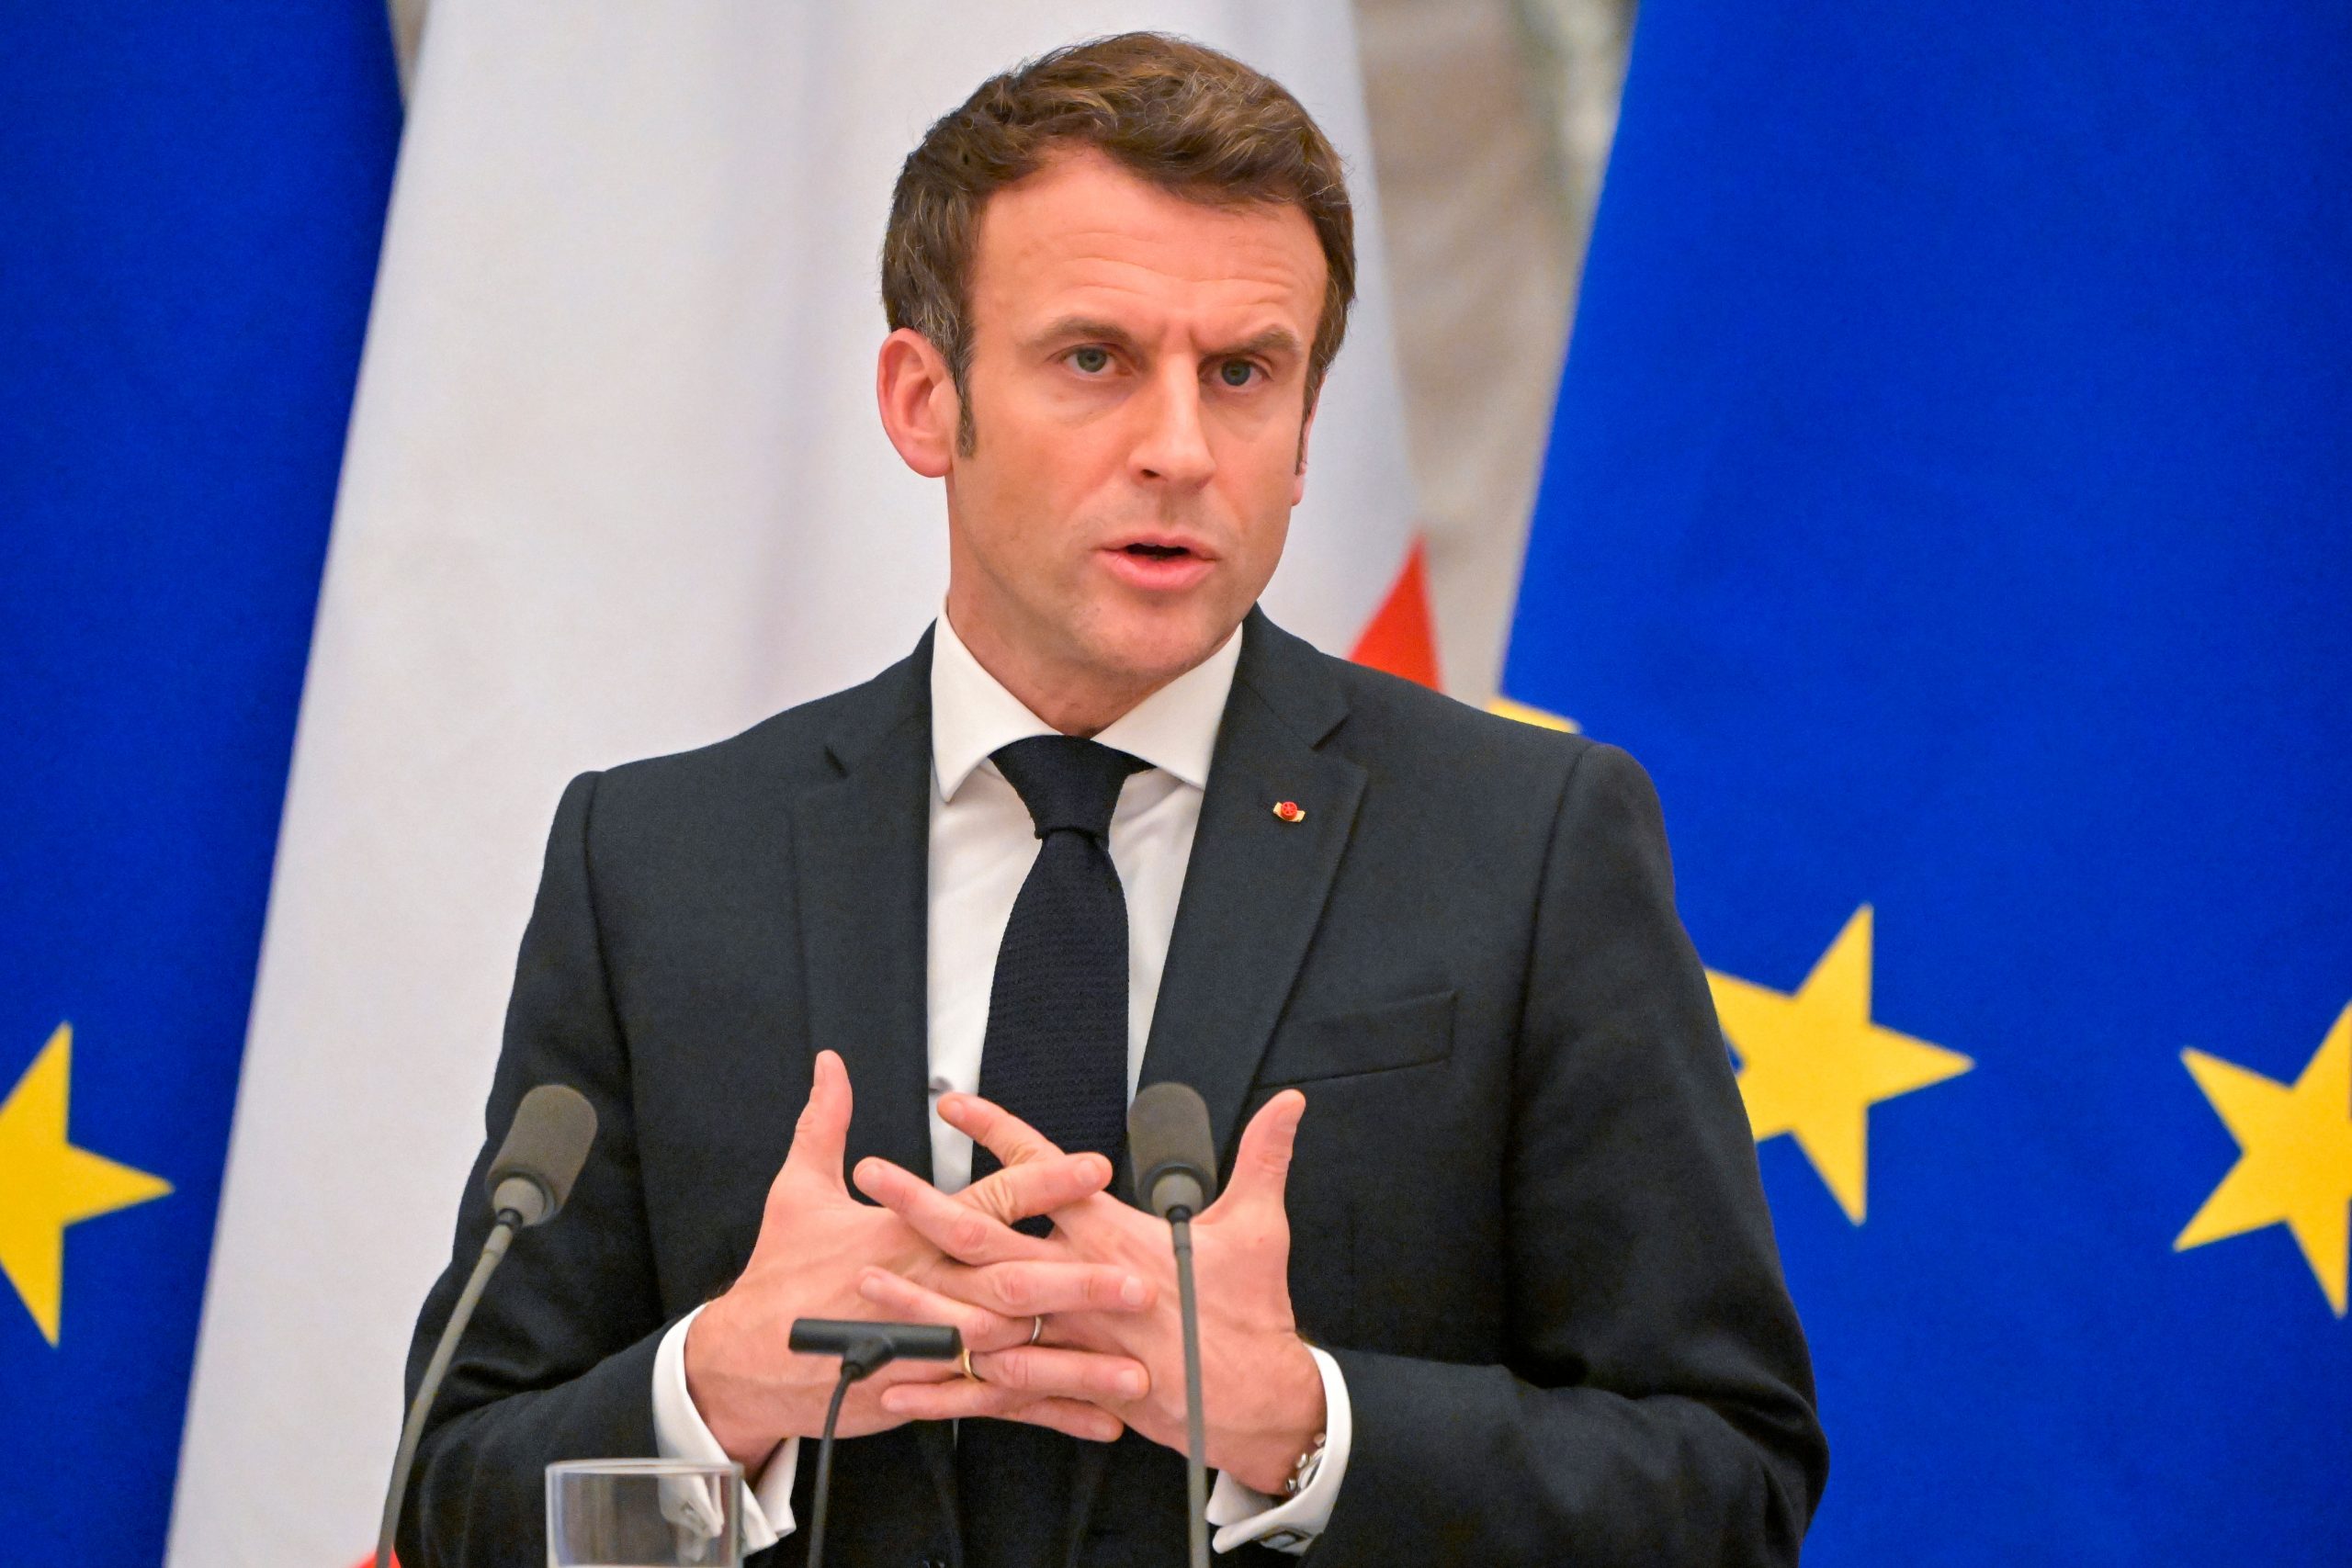 Russian invasion of Ukraine an ‘attack on peace’, says Emmanuel Macron